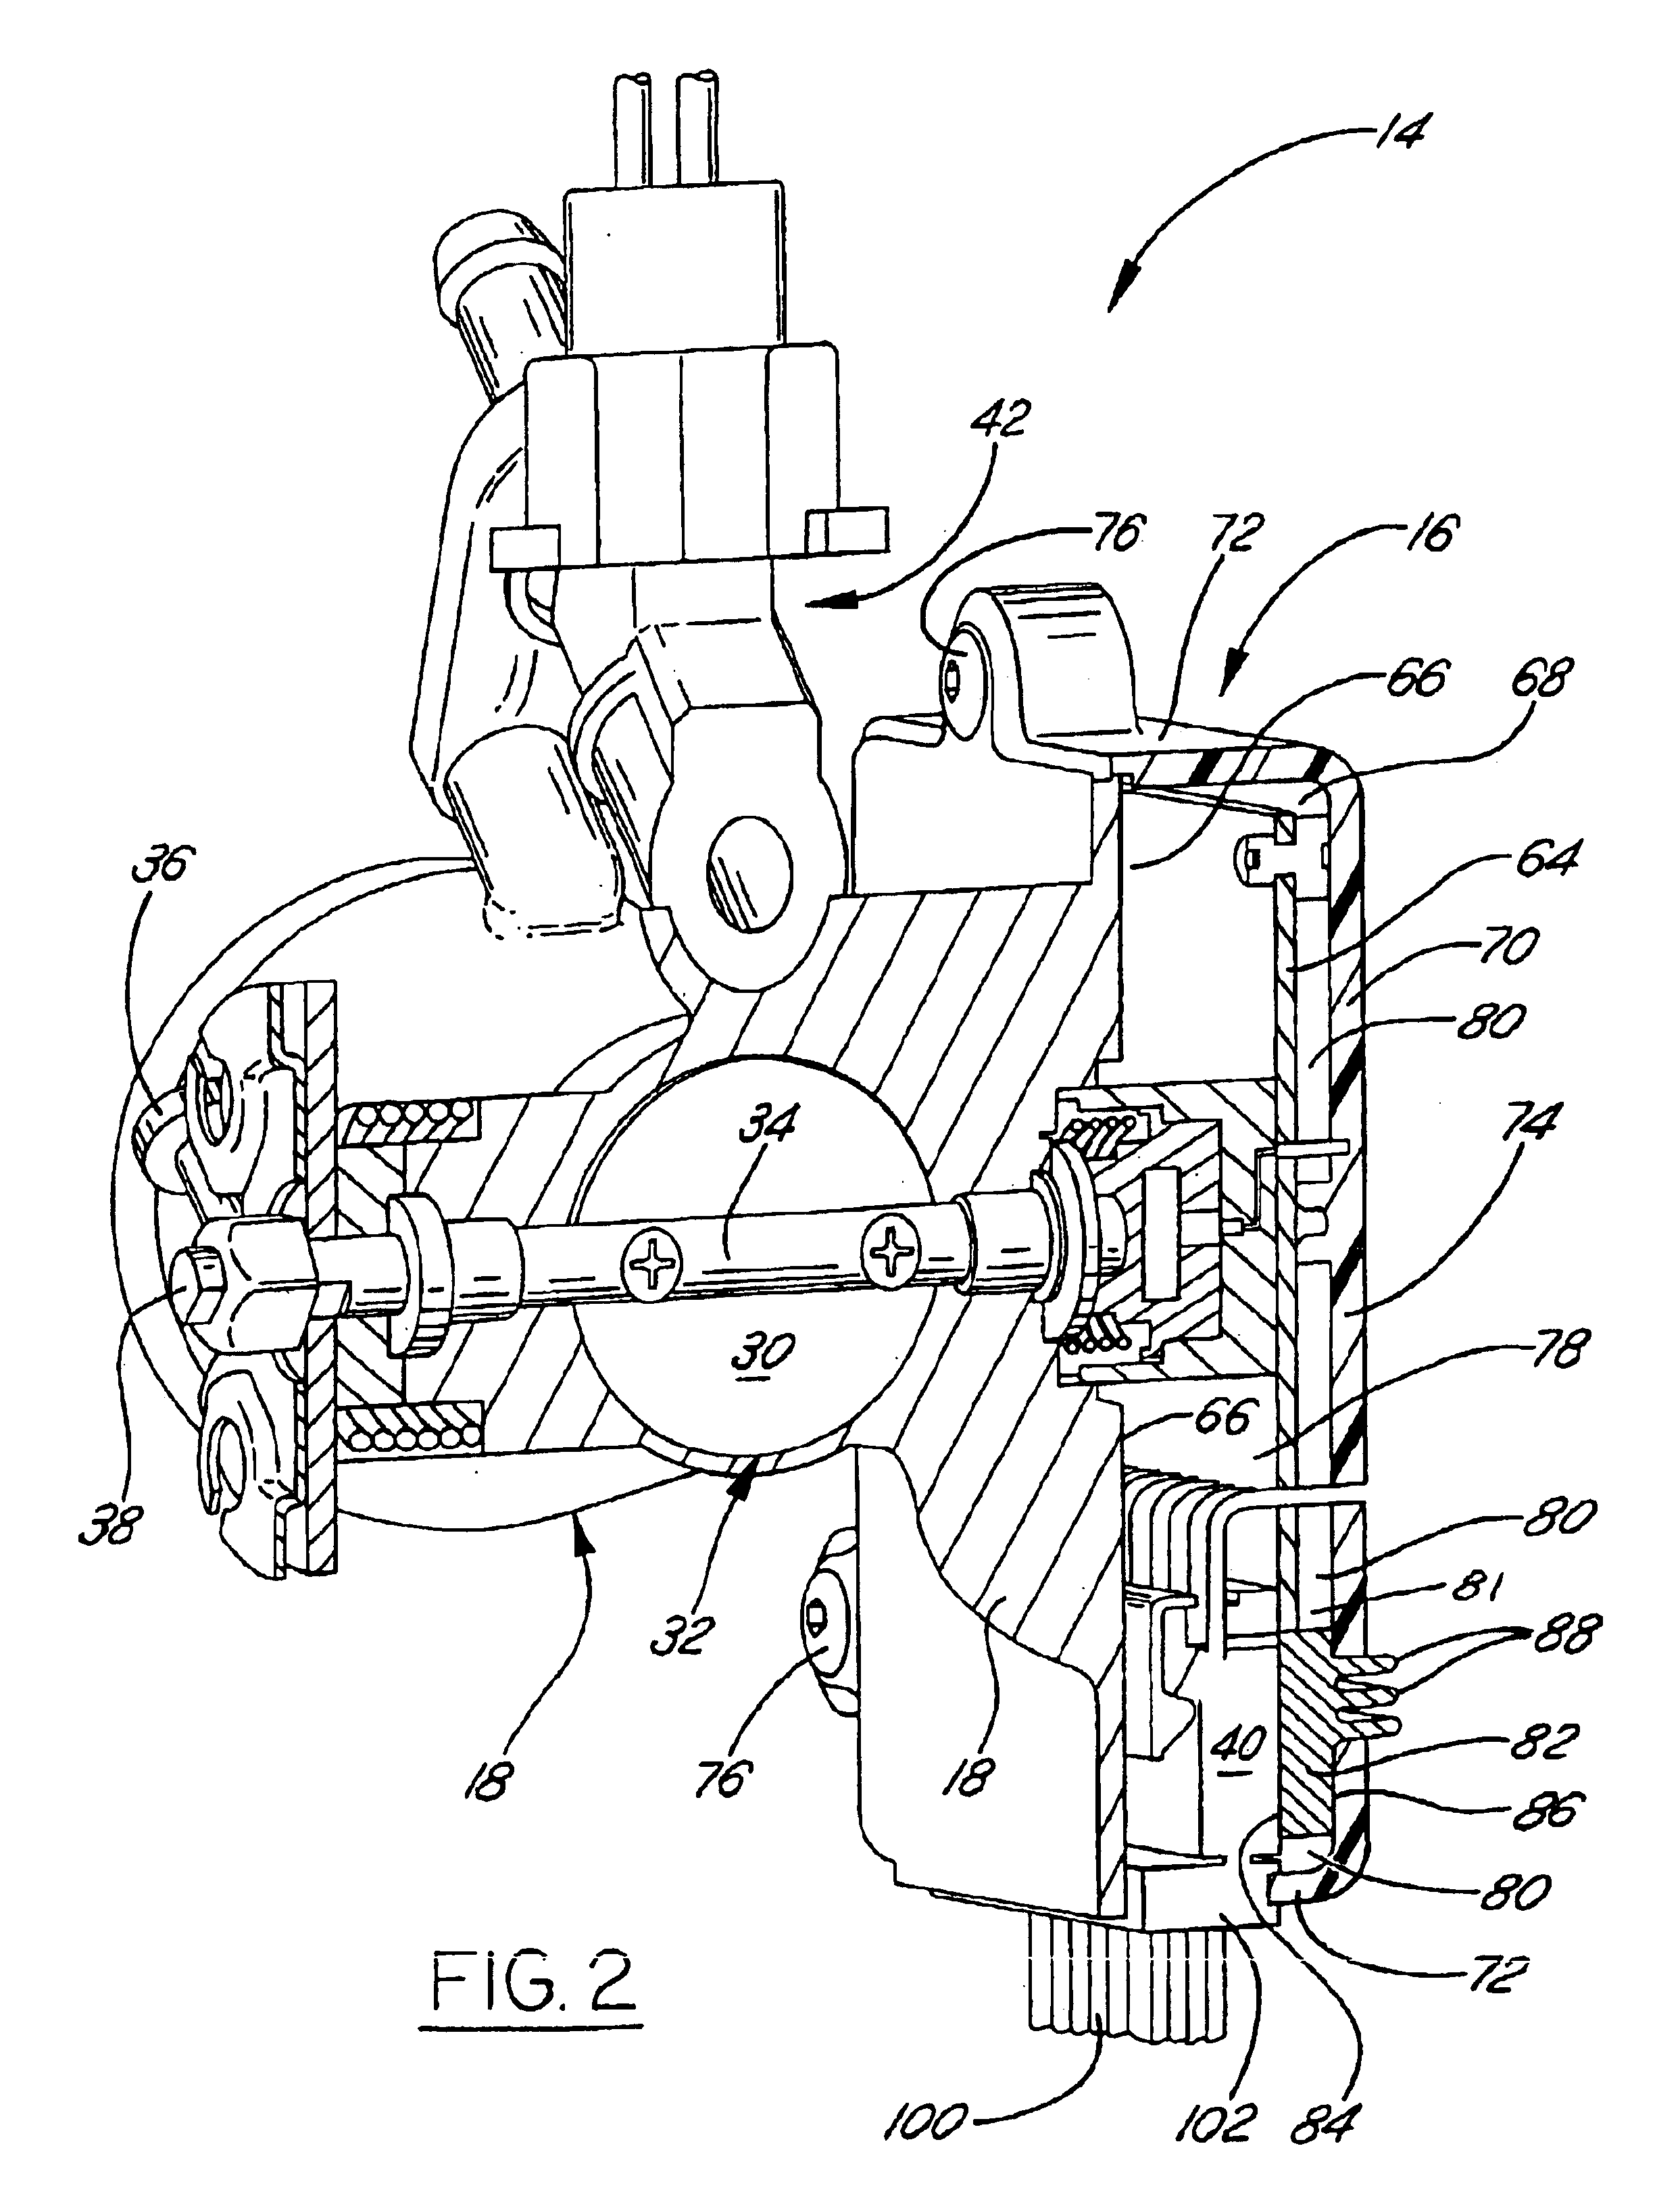 Throttle body assembly for a fuel injected combustion engine